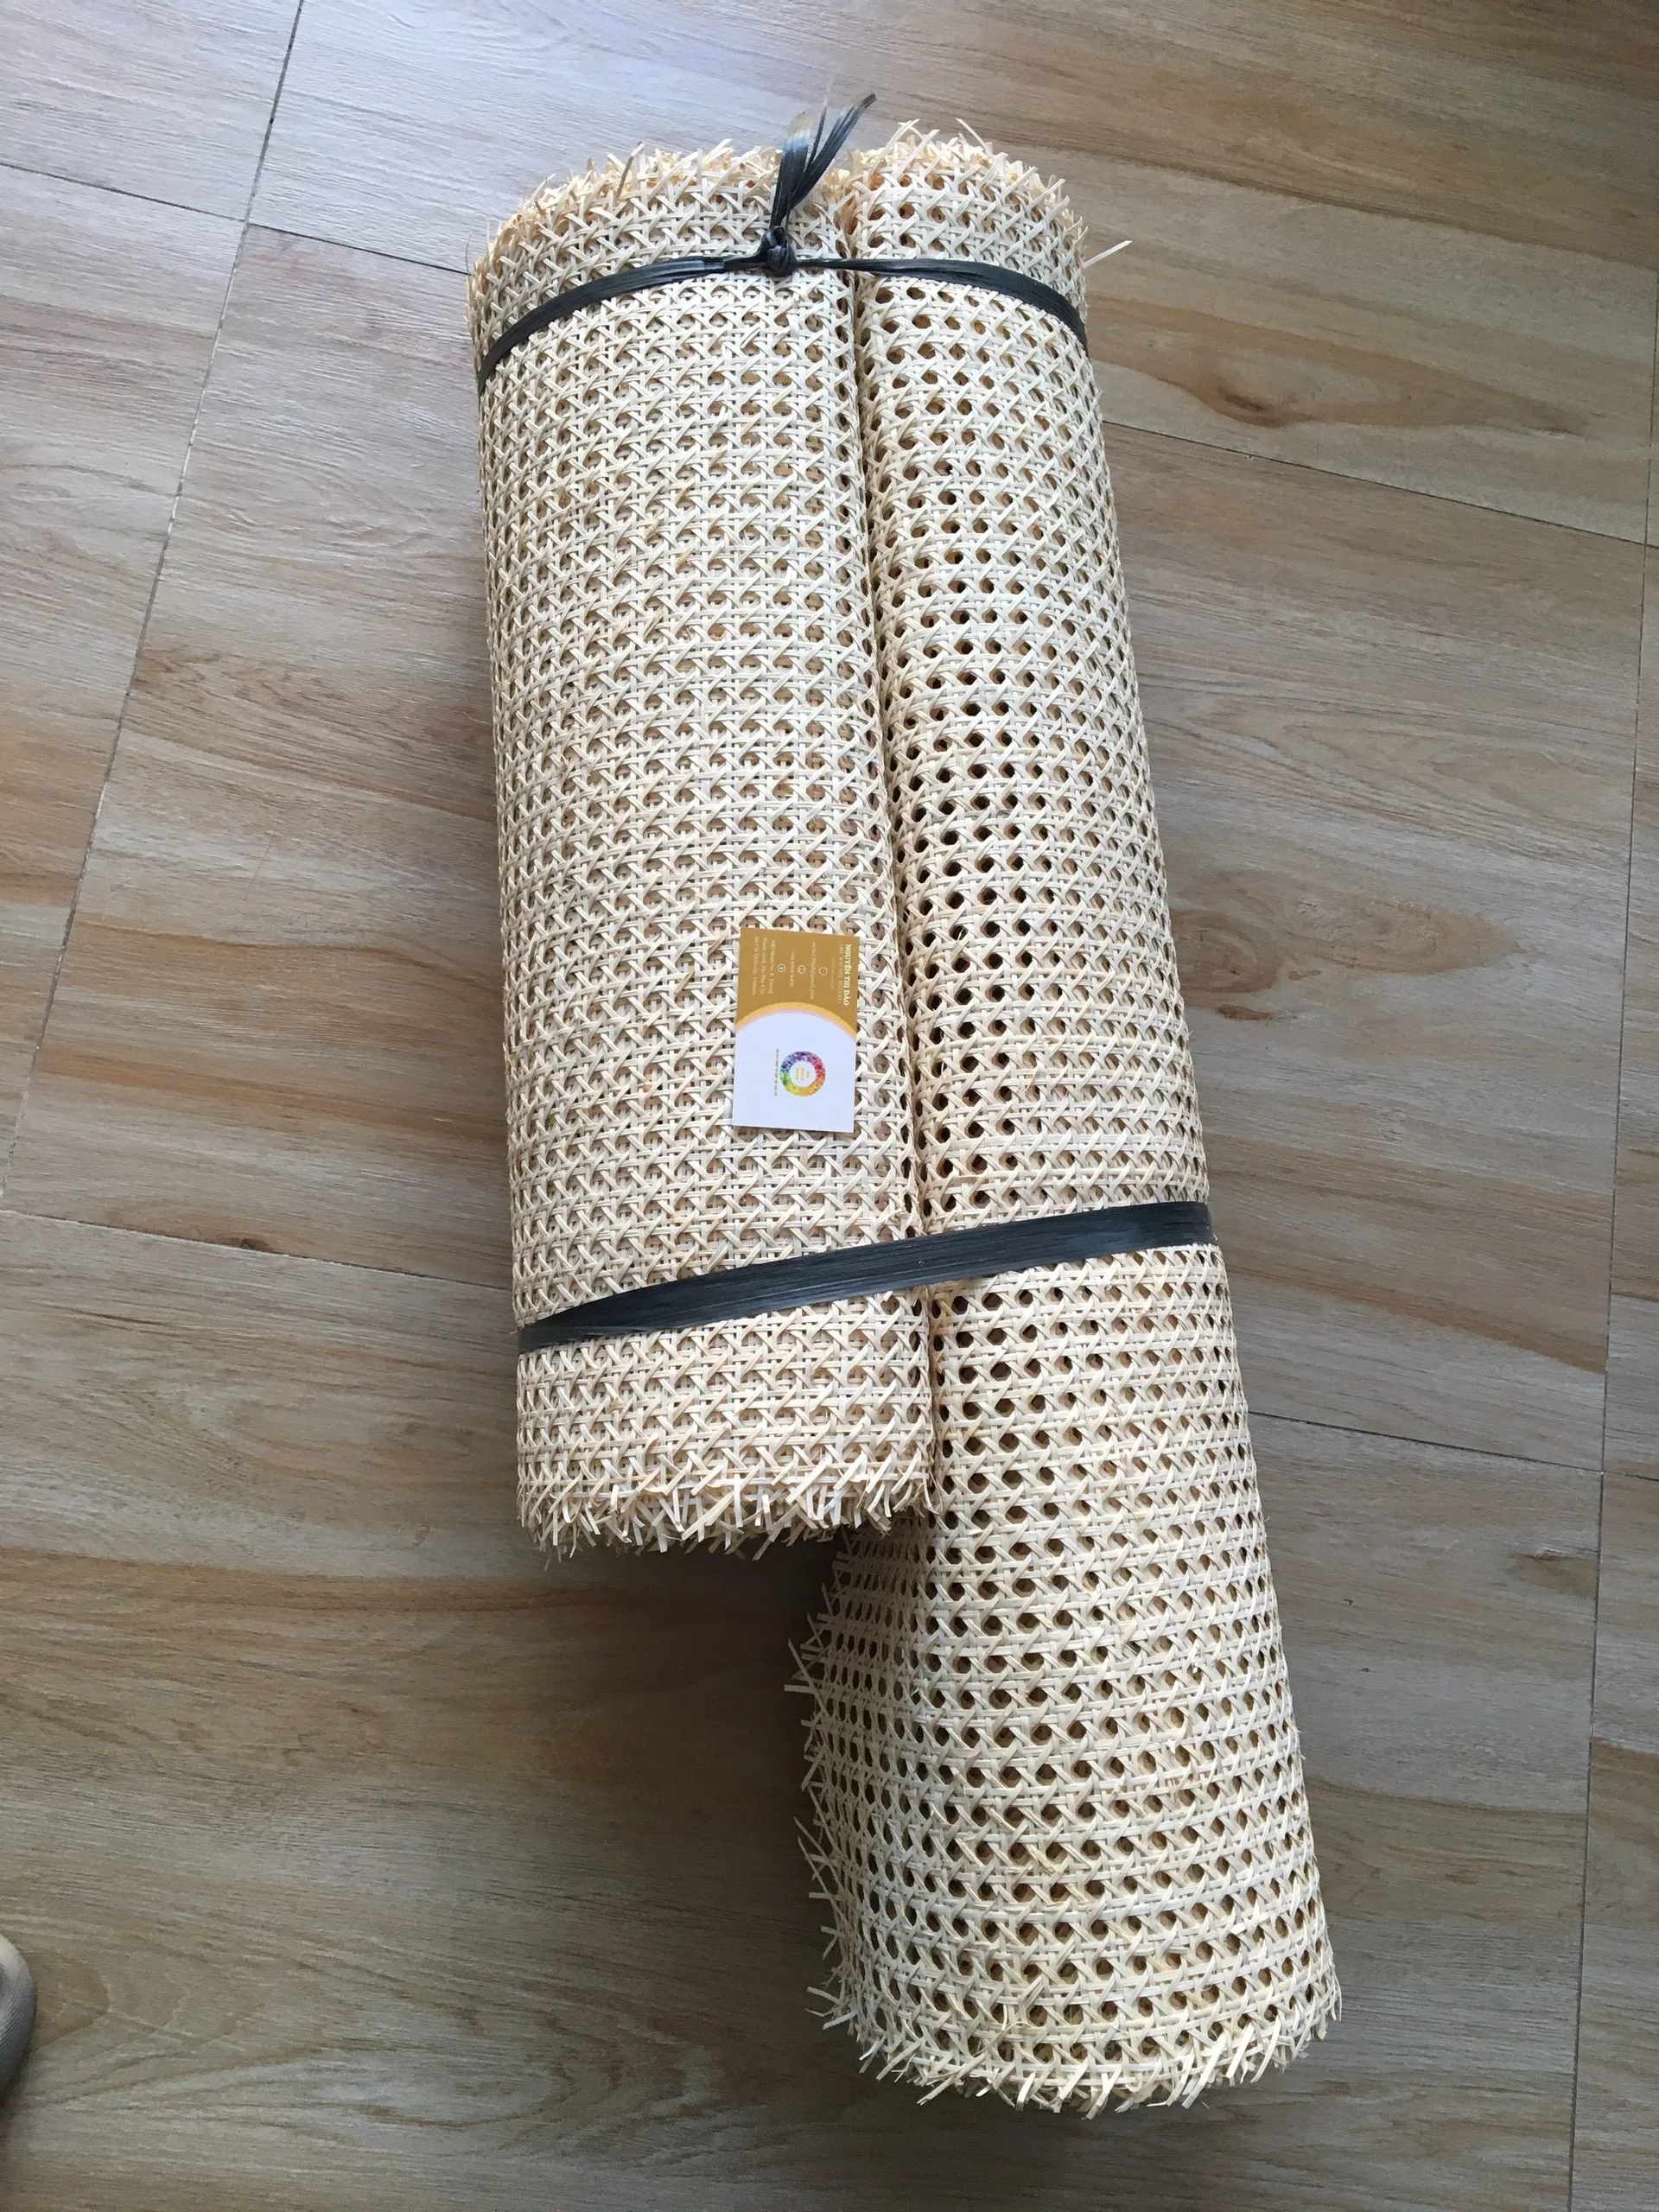 
Best Selling Rattan Cane Webbing Roll Natural Mesh Furniture Bleached Square Woven Rattan Cane Webbing 